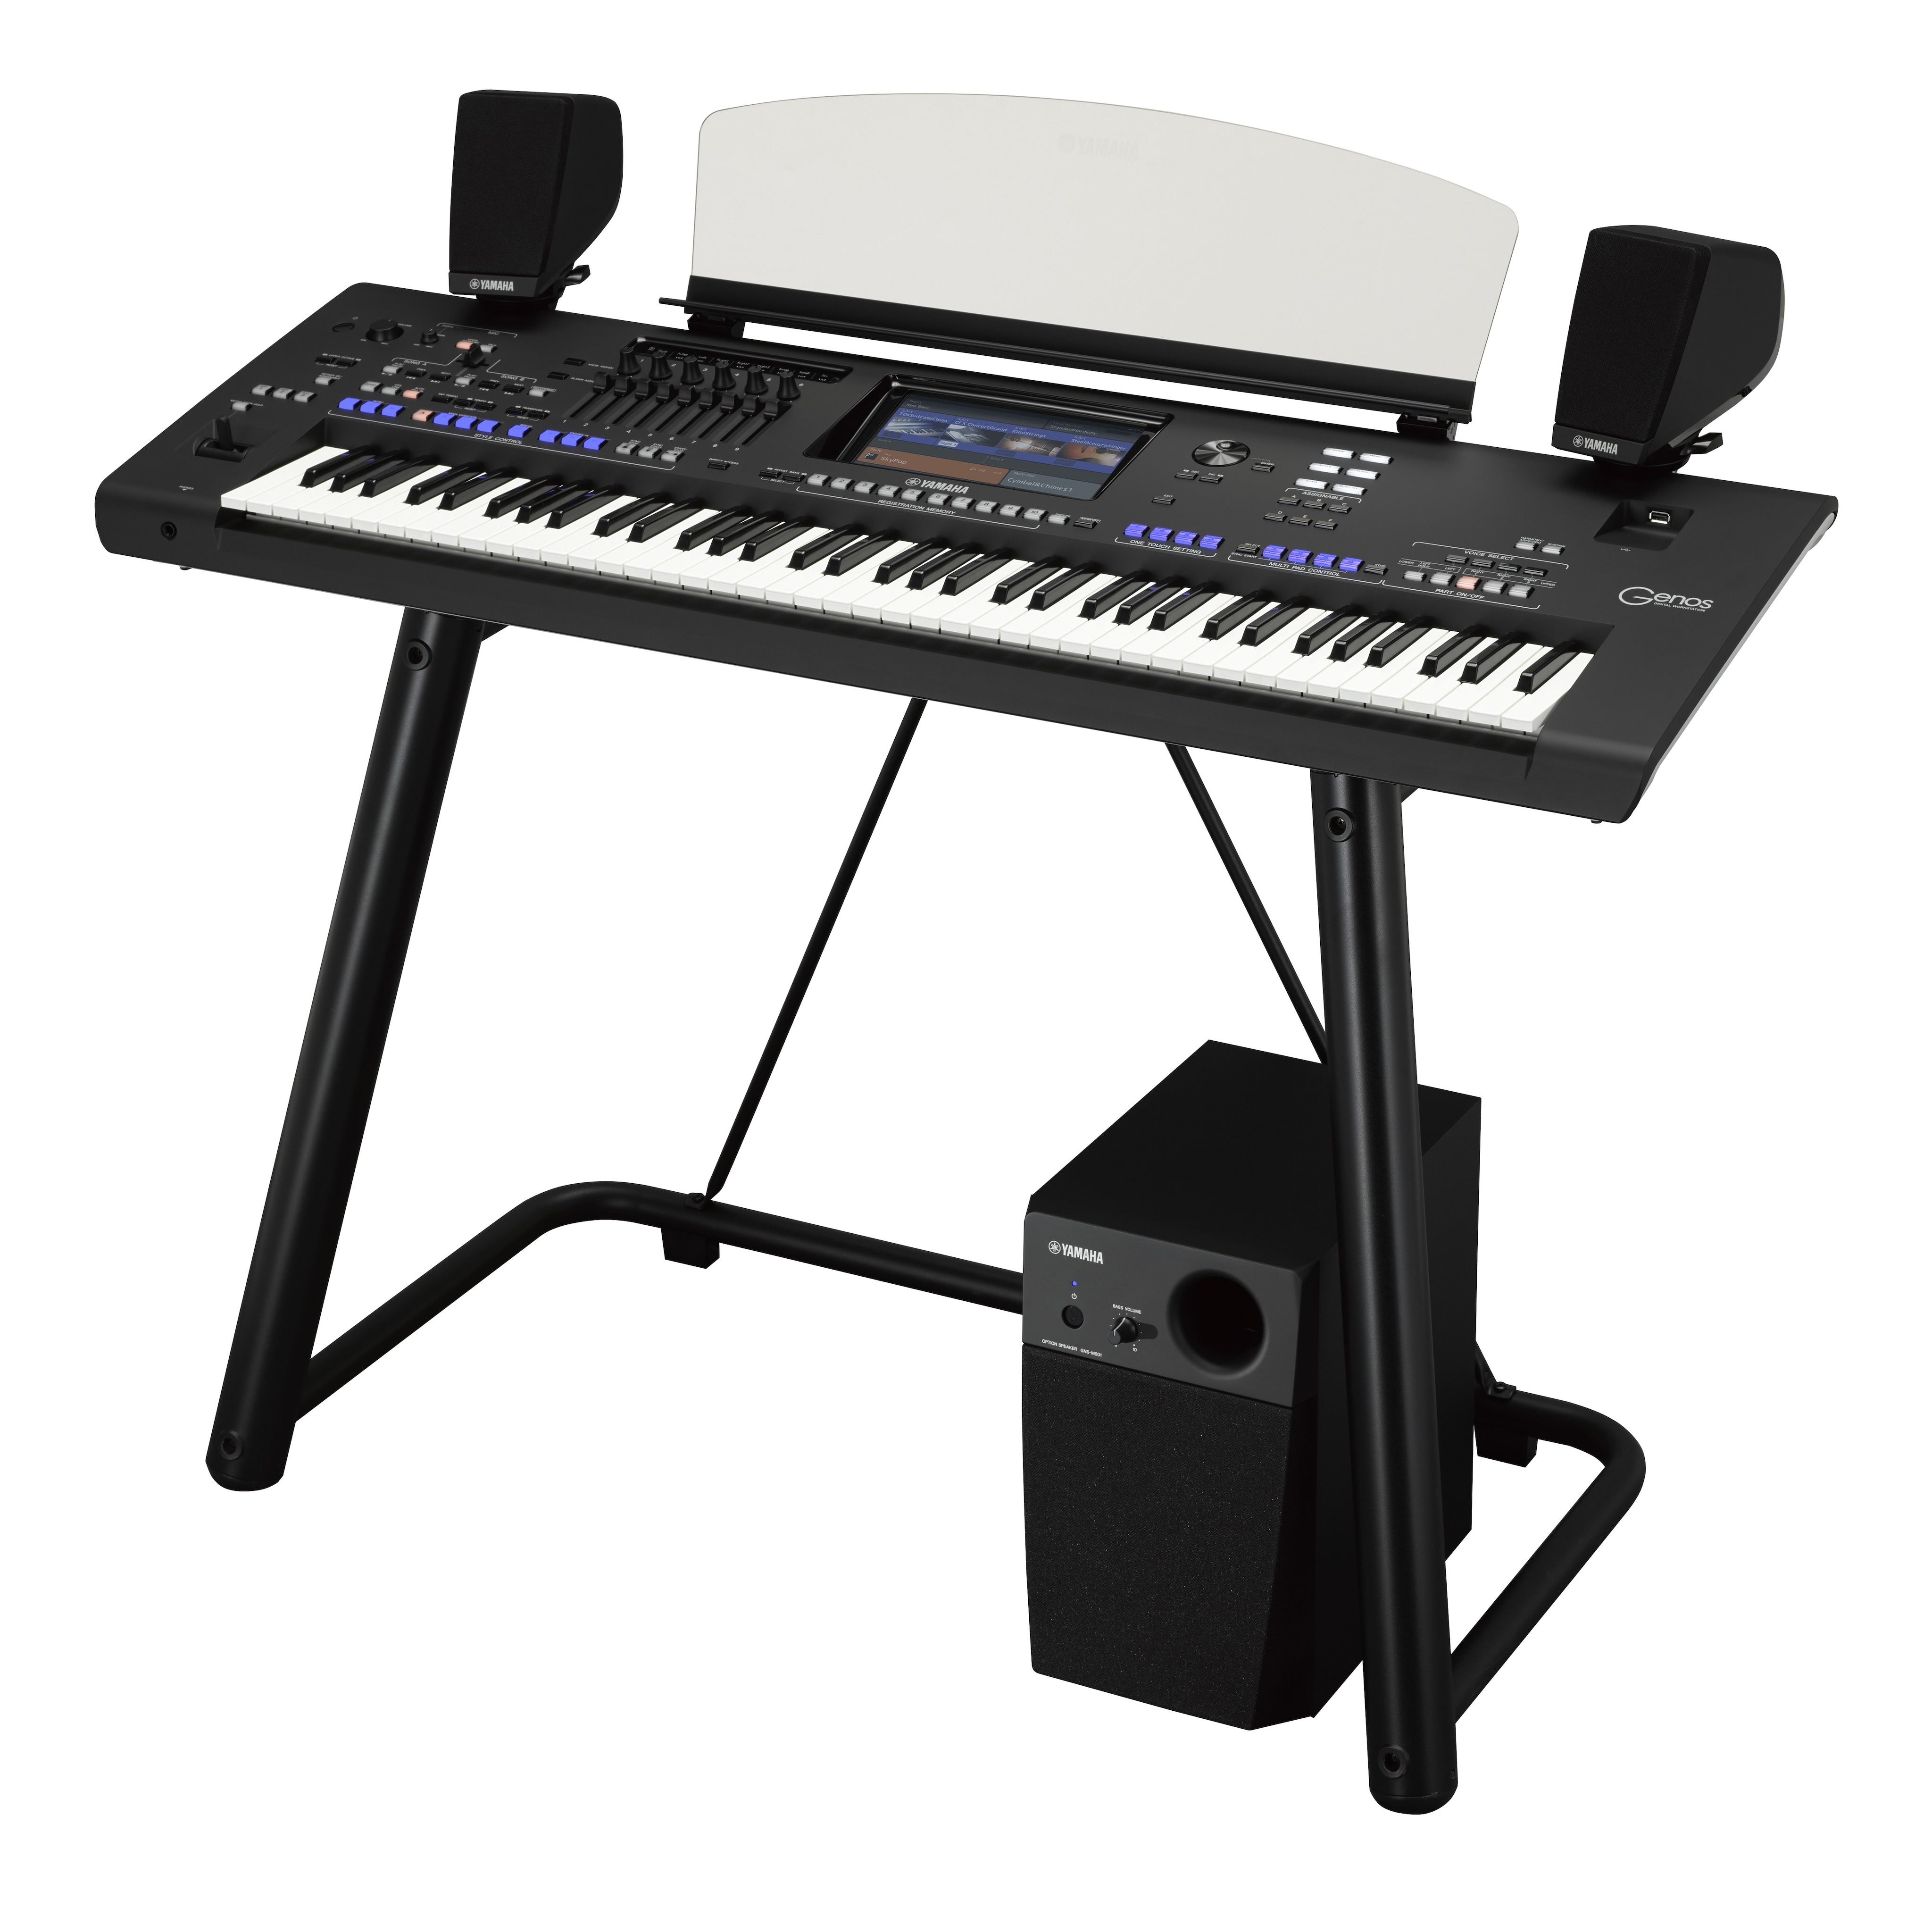 L-7B - Overview - Accessories - Keyboard Instruments - Musical 